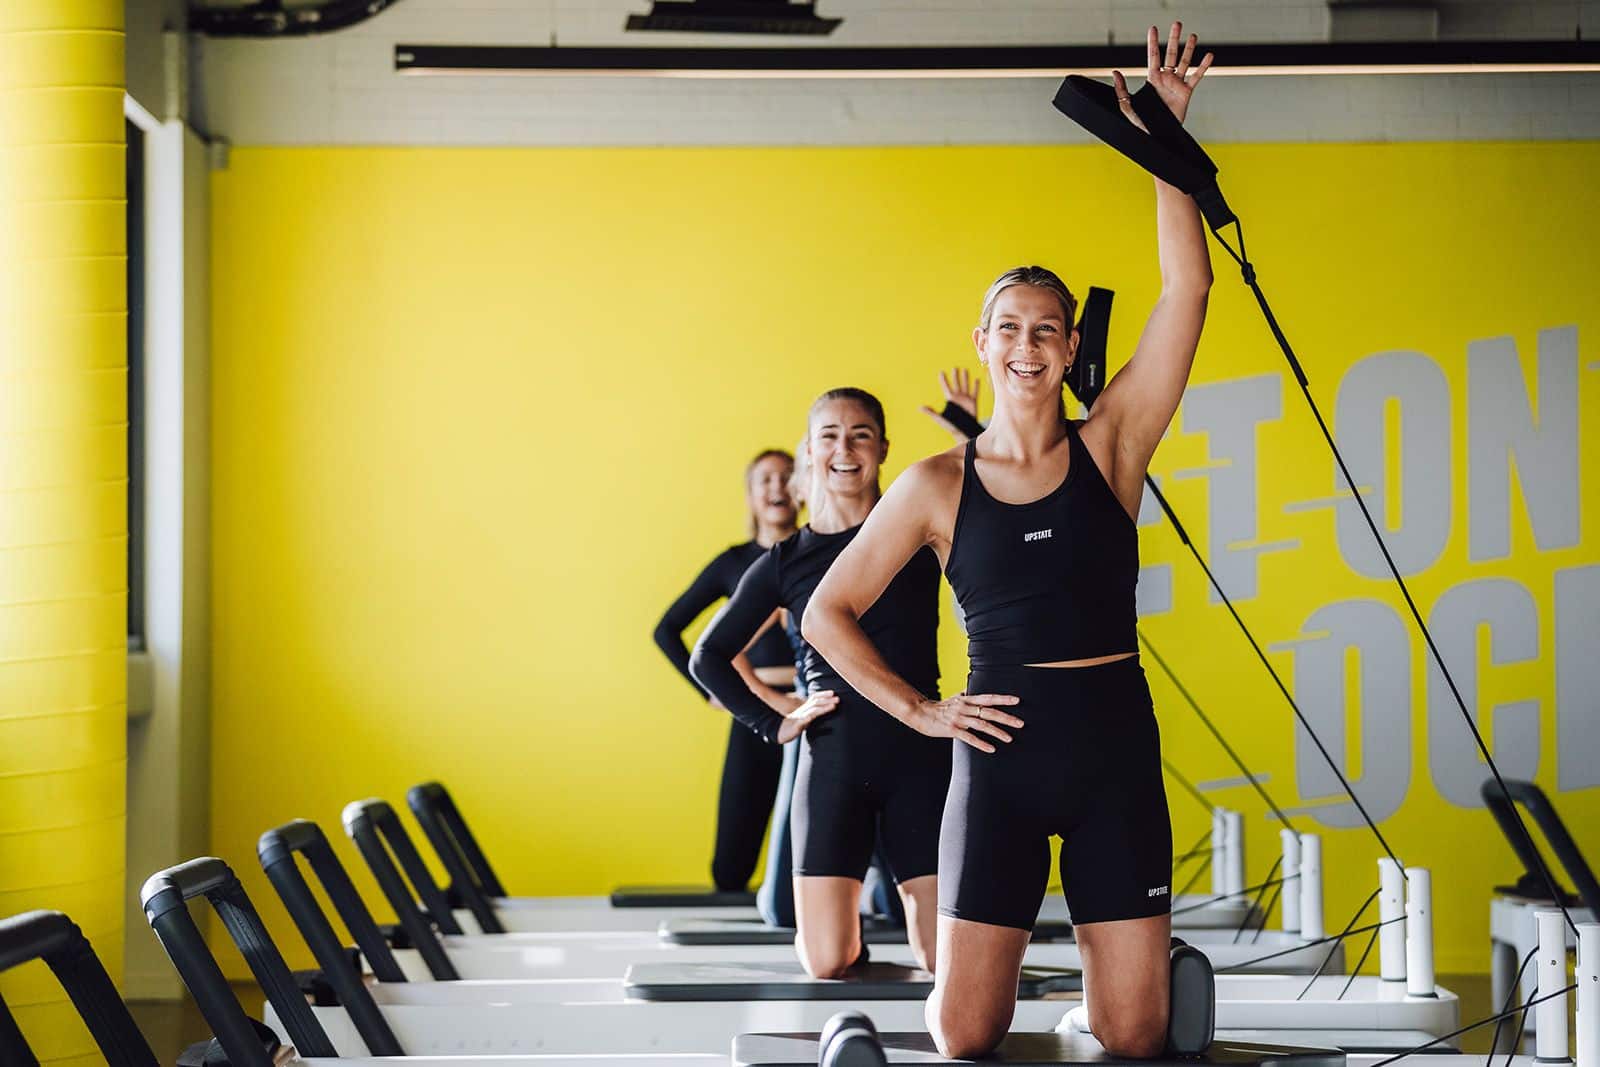 Group of positive minded women work out on reformer beds of Upstate Studios Ocean Grove. Happy studio space surrounds them, with yellow hues, industrial details and brights sunlight streams down.